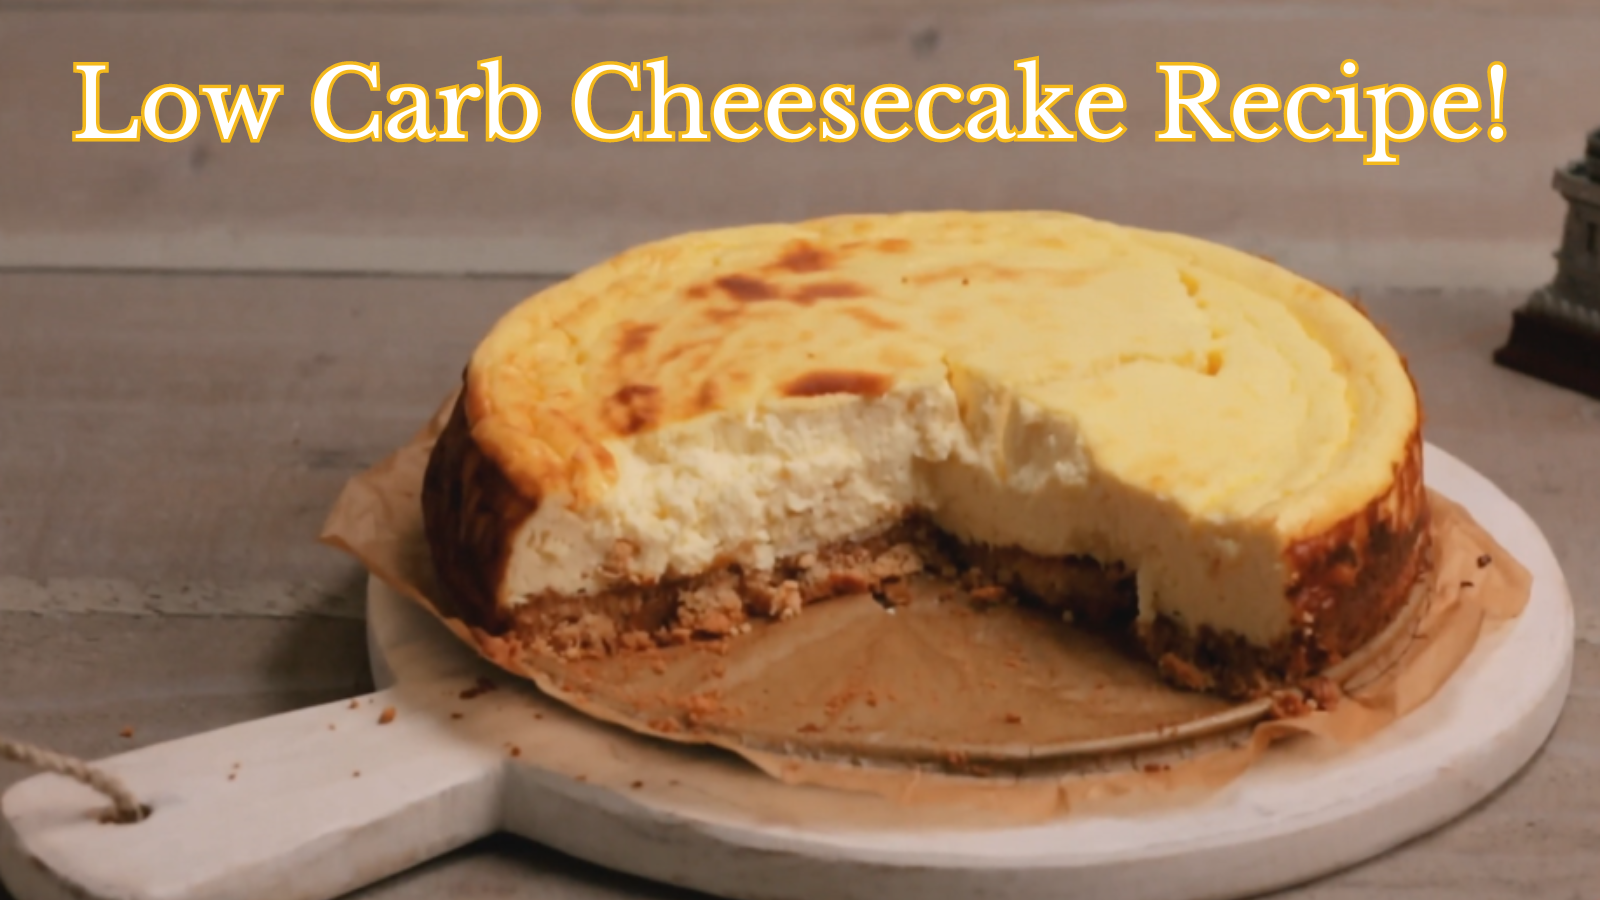 Indulge Guilt-Free: The Ultimate Low Carb Cheesecake Recipe